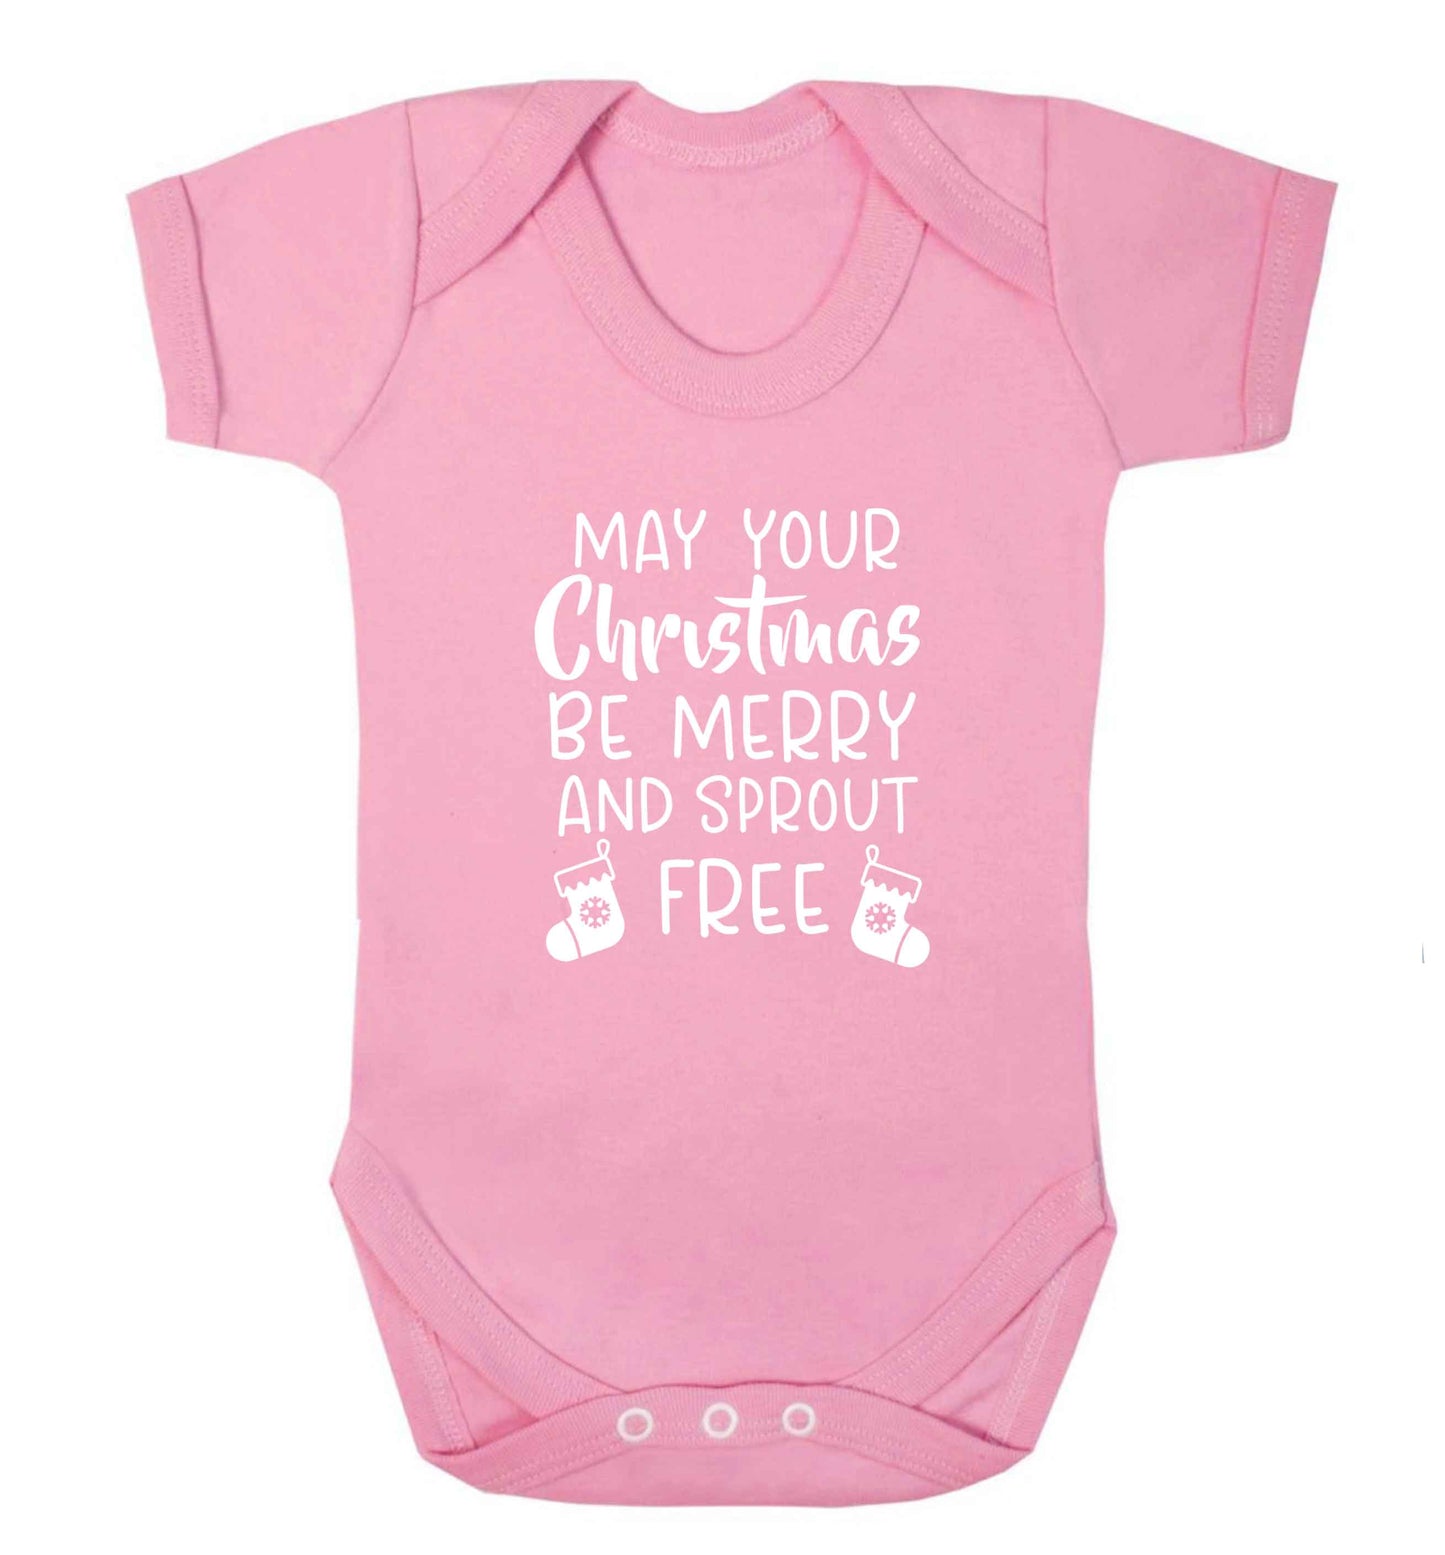 May your Christmas be merry and sprout free baby vest pale pink 18-24 months